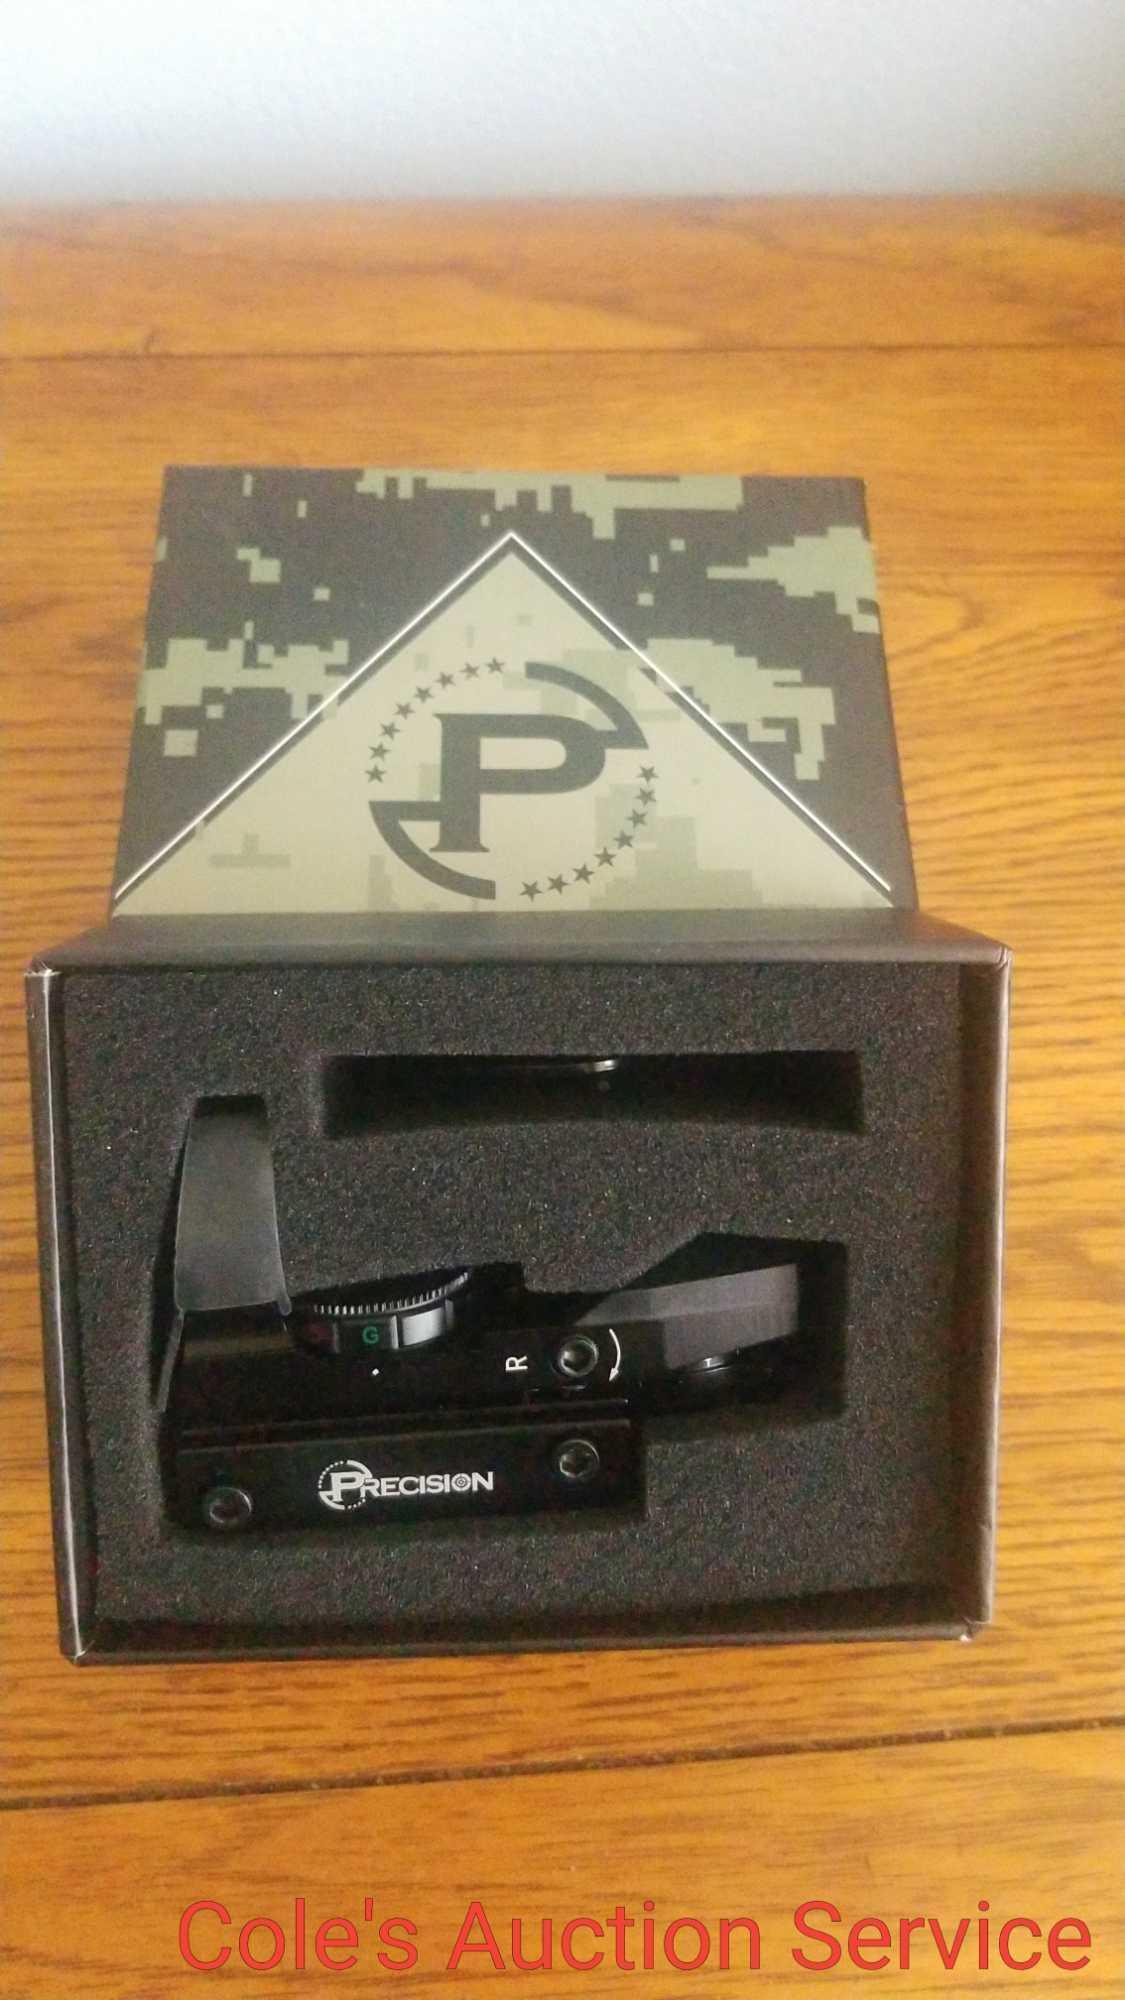 Electro Dot Manufactured by Precision Tactical Optics. Brand new in box. tubeless design,